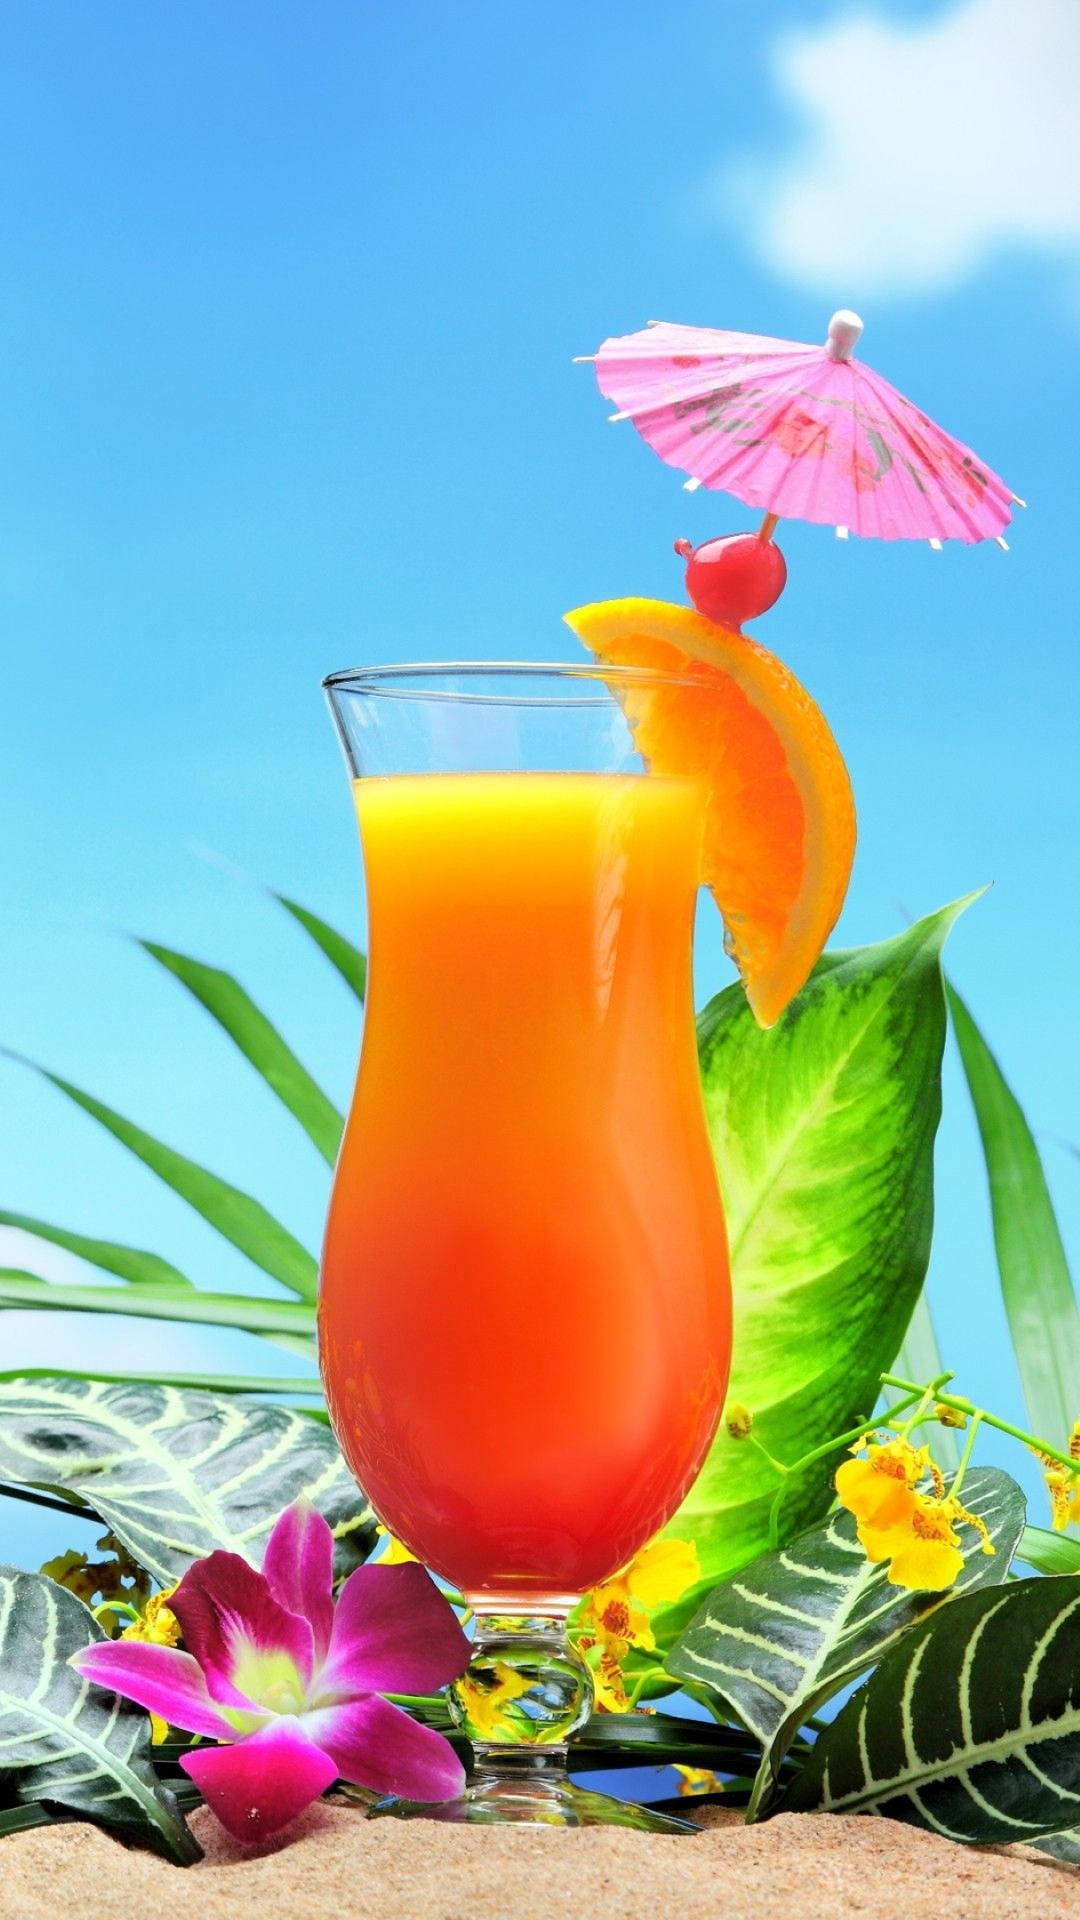 Tropical Drink Background Wallpaper